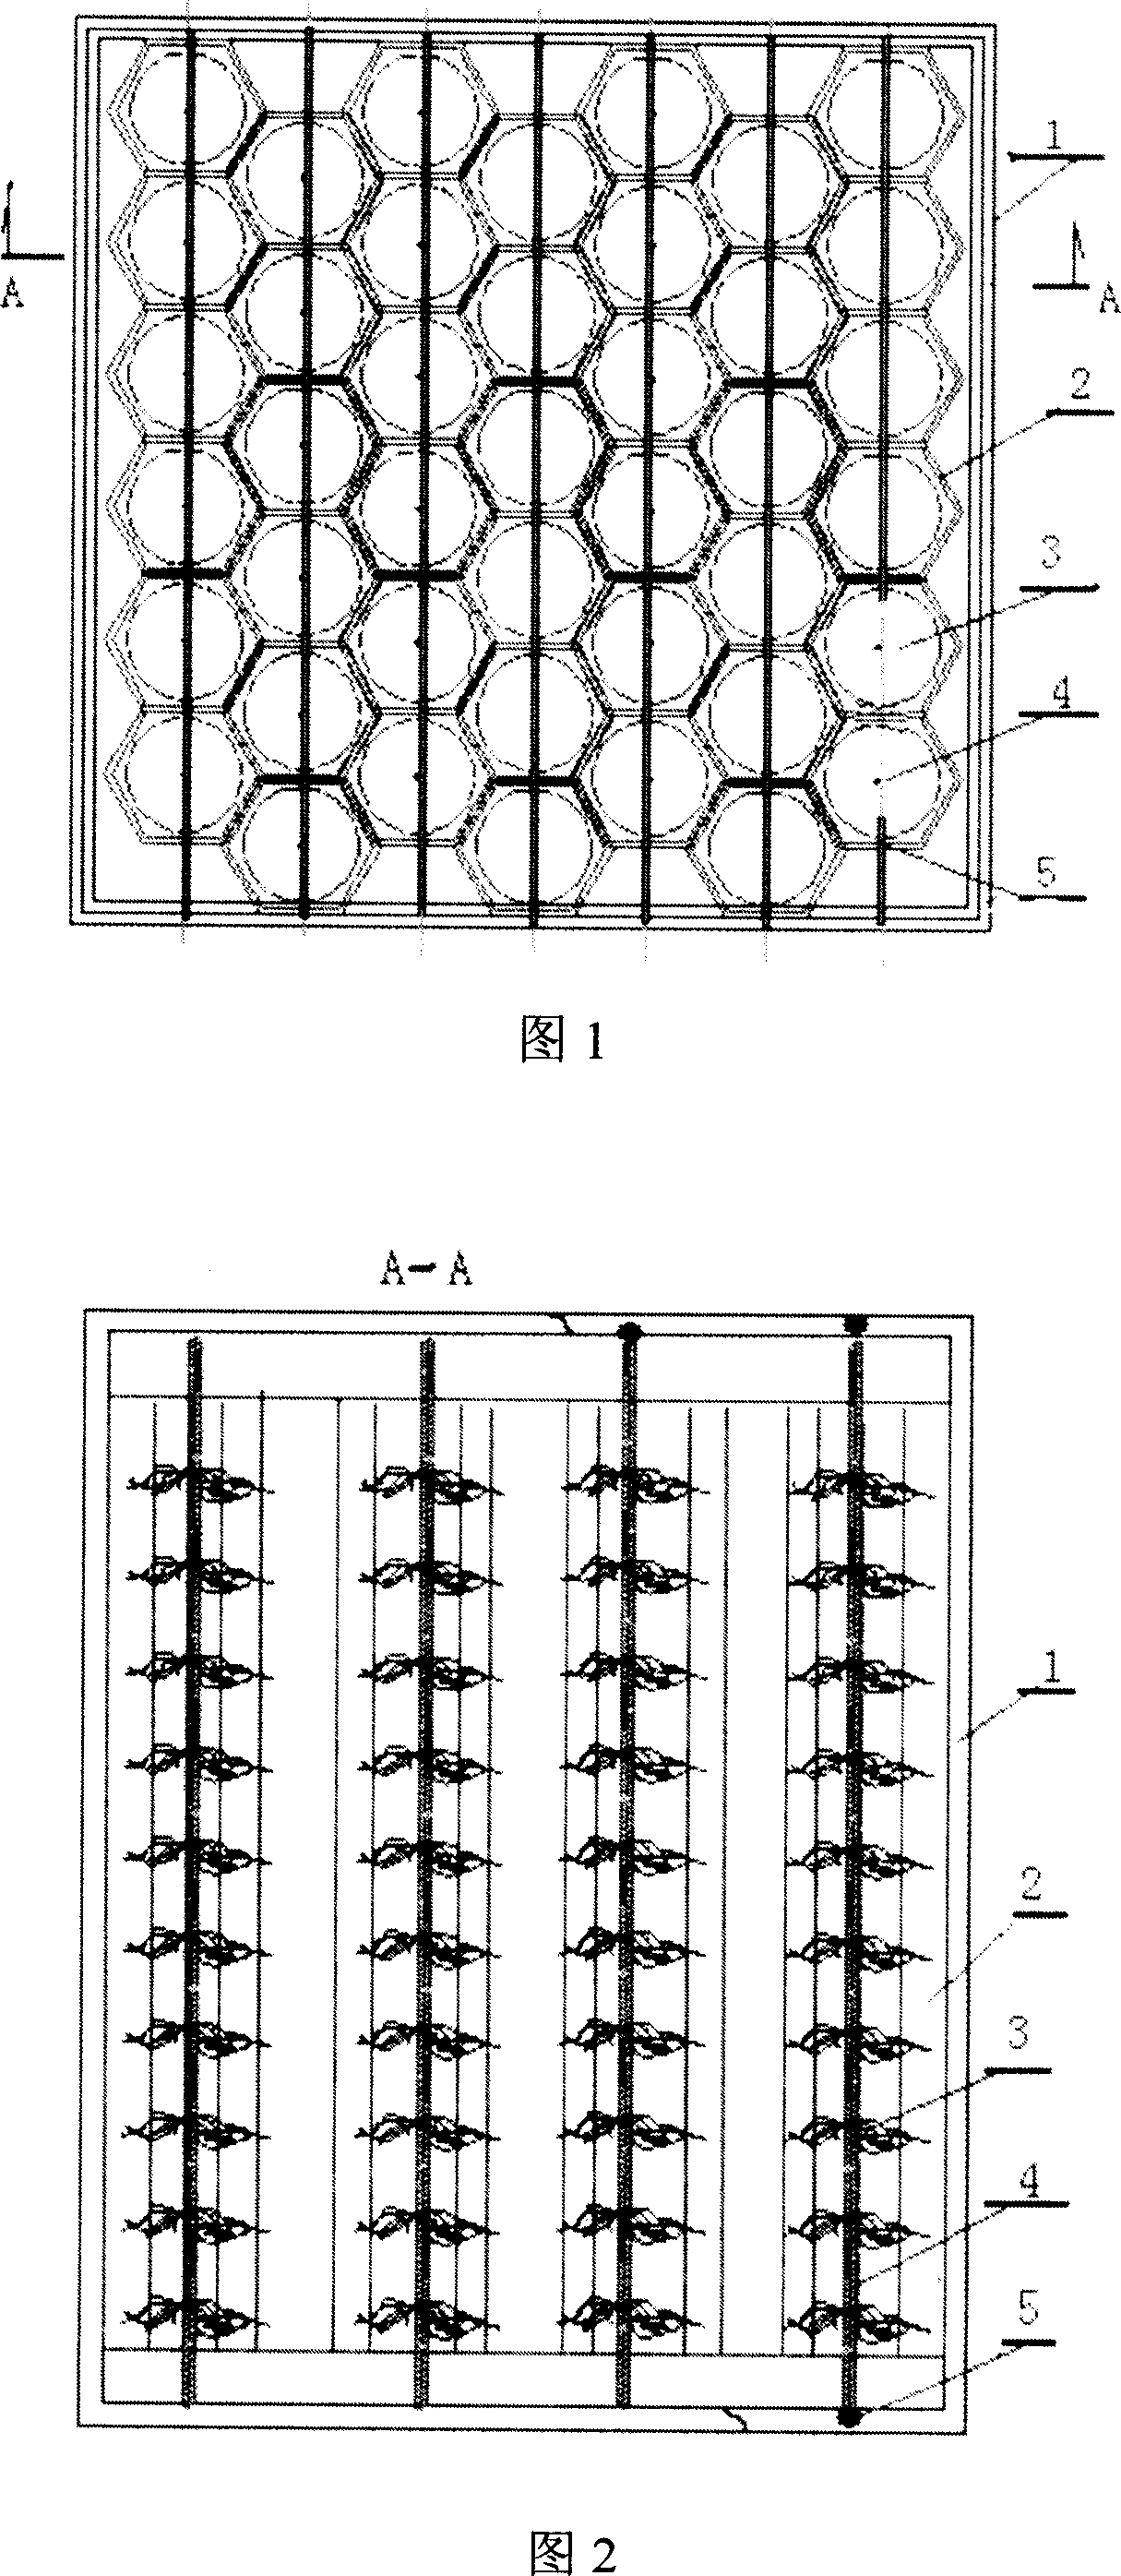 Fiber filtering component with honeycomb wall cross section structure